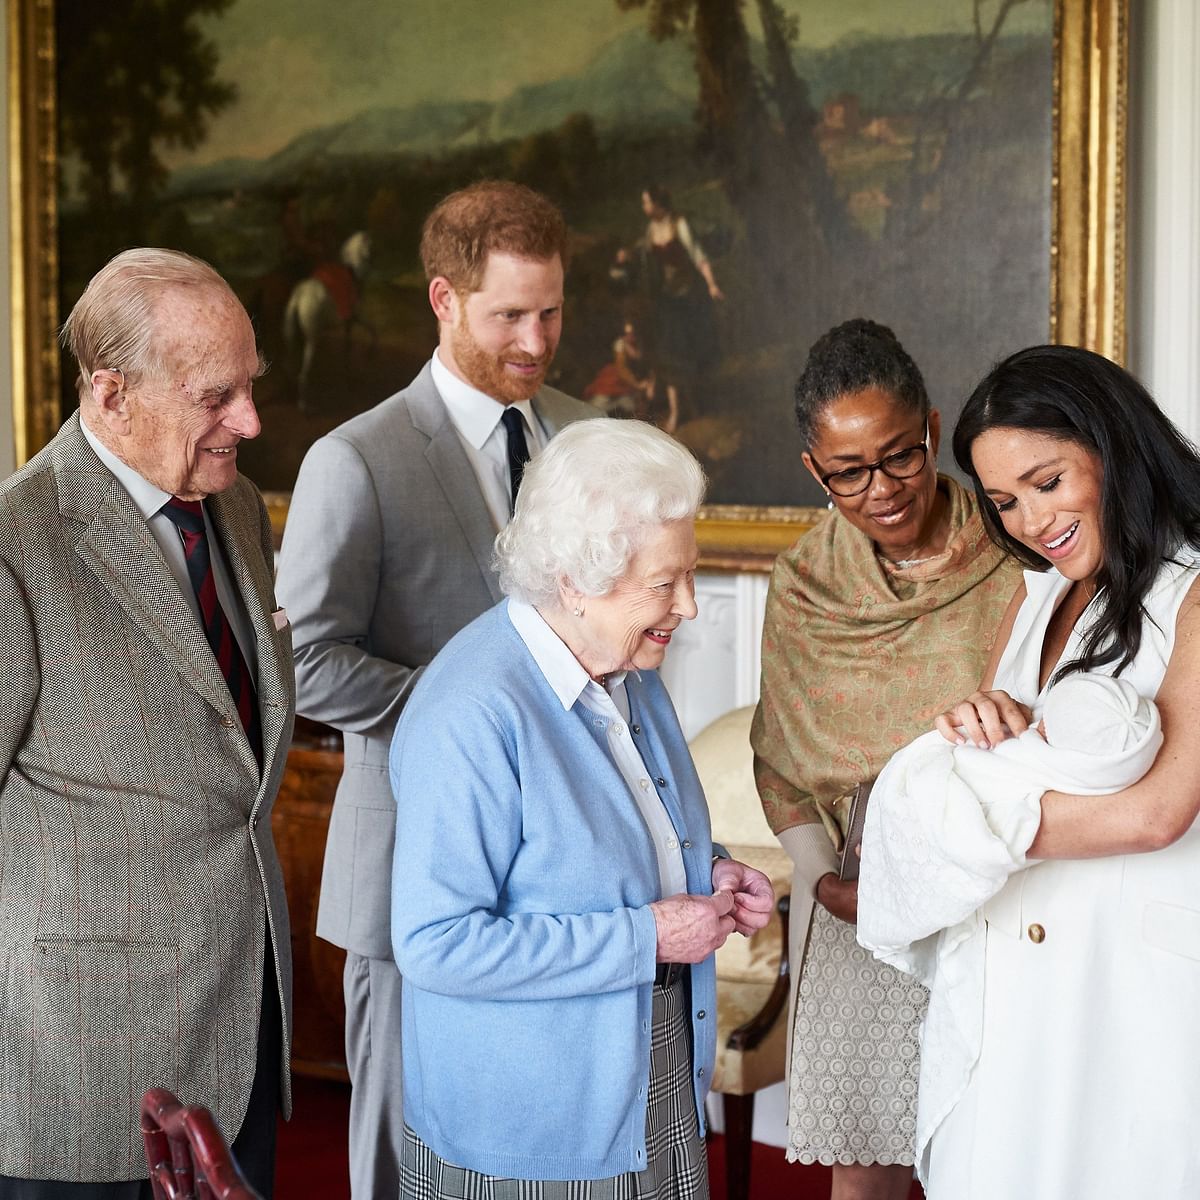 A handout photograph released by The Duke and Duchess of Sussex on 8 May 2019 shows Britain`s Prince Harry, Duke of Sussex (L), and his wife Meghan, Duchess of Sussex (R), accompanied by Meghan`s mother Doria Ragland, showing their newborn baby son, Archie Harrison Mountbatten-Windsor to Britain`s Queen Elizabeth II (C) and Britain`s Prince Philip, Duke of Edinburgh (L), at Windsor Castle in Windsor, west of London on 8 May 2019. Photo: AFP